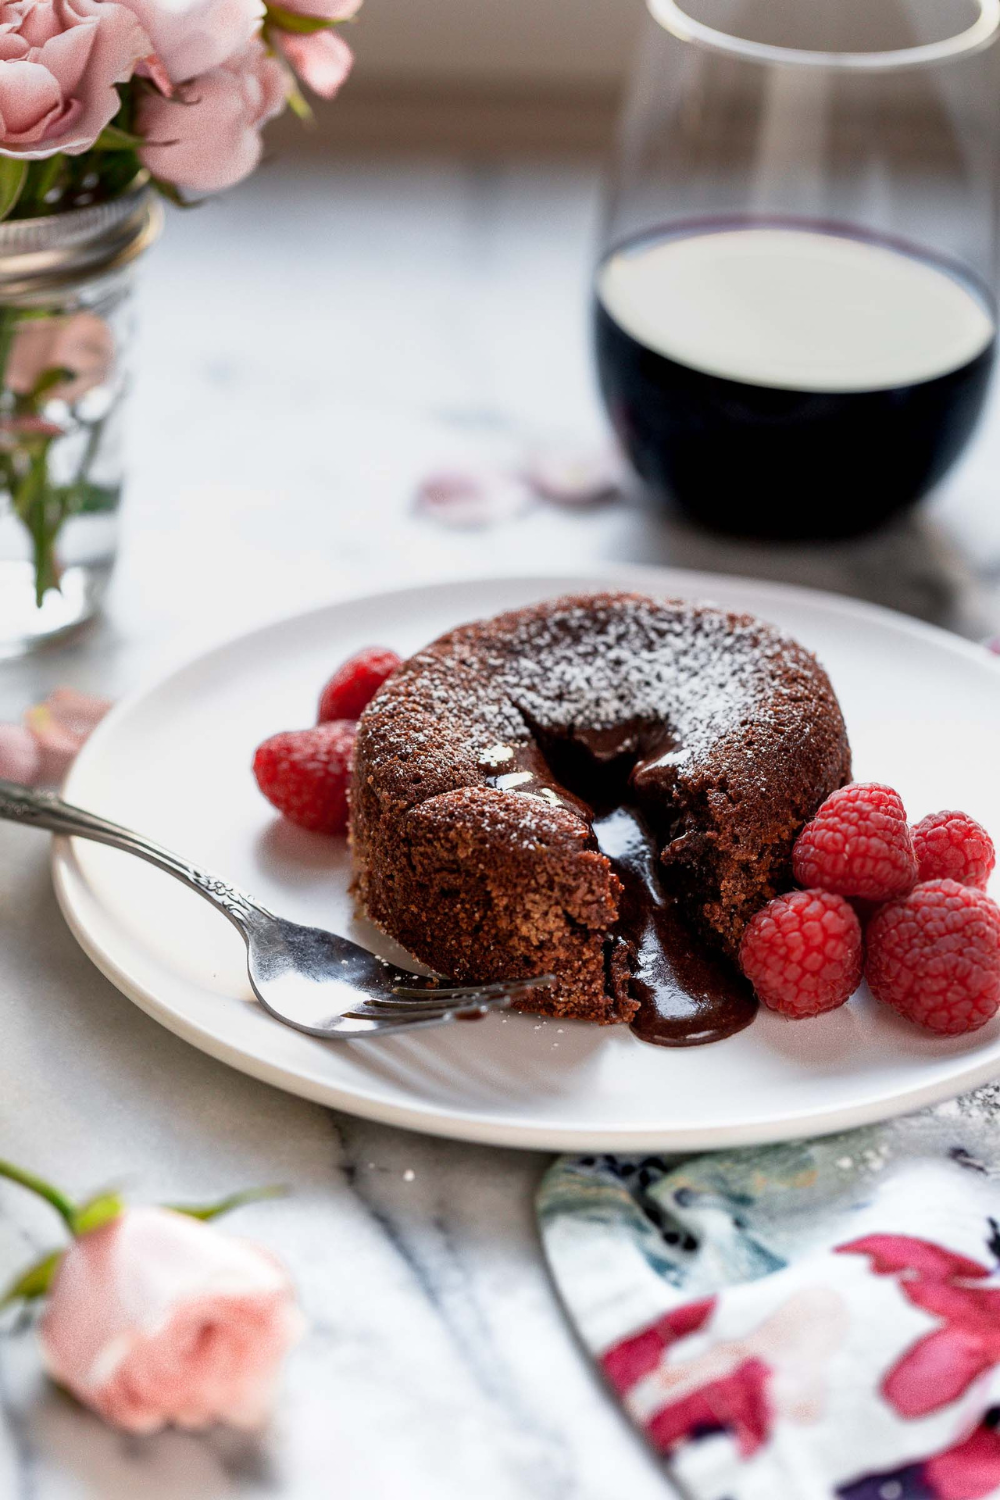 a chocolate lava cake on a white plate with a fork and some fresh raspberries.